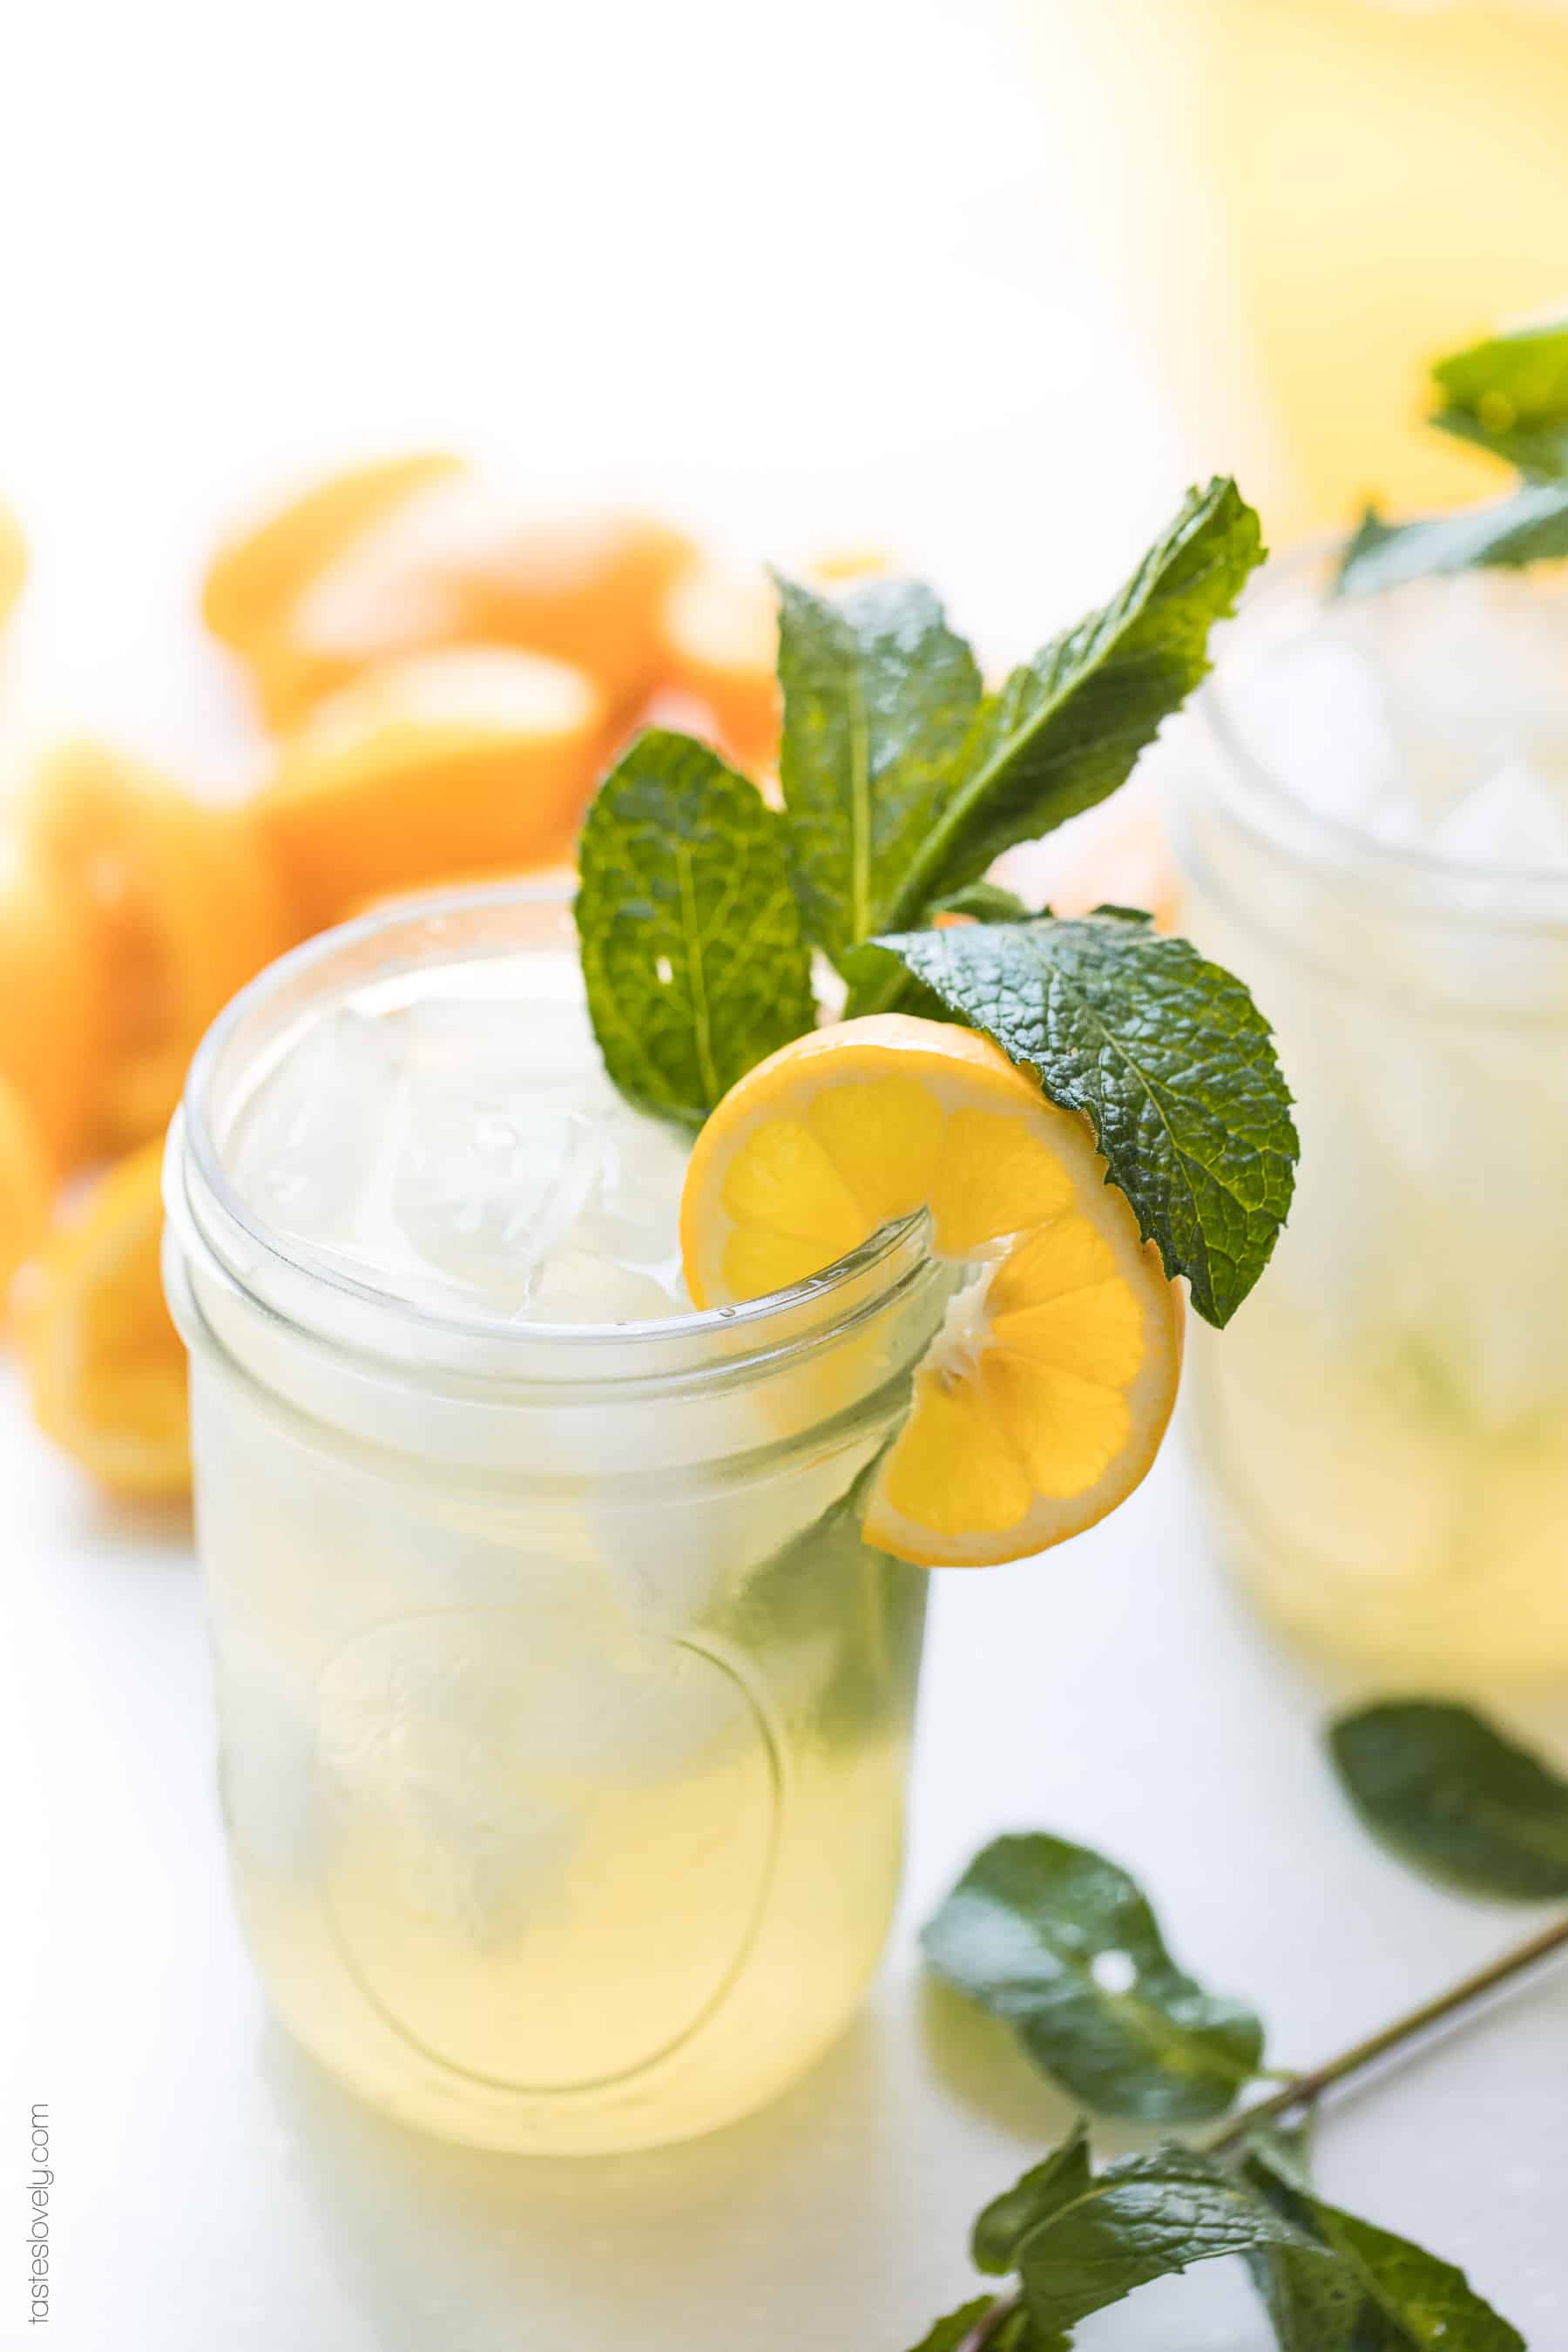 Healthier Paleo Lemonade - no refined sugar, sweetened with maple syrup!